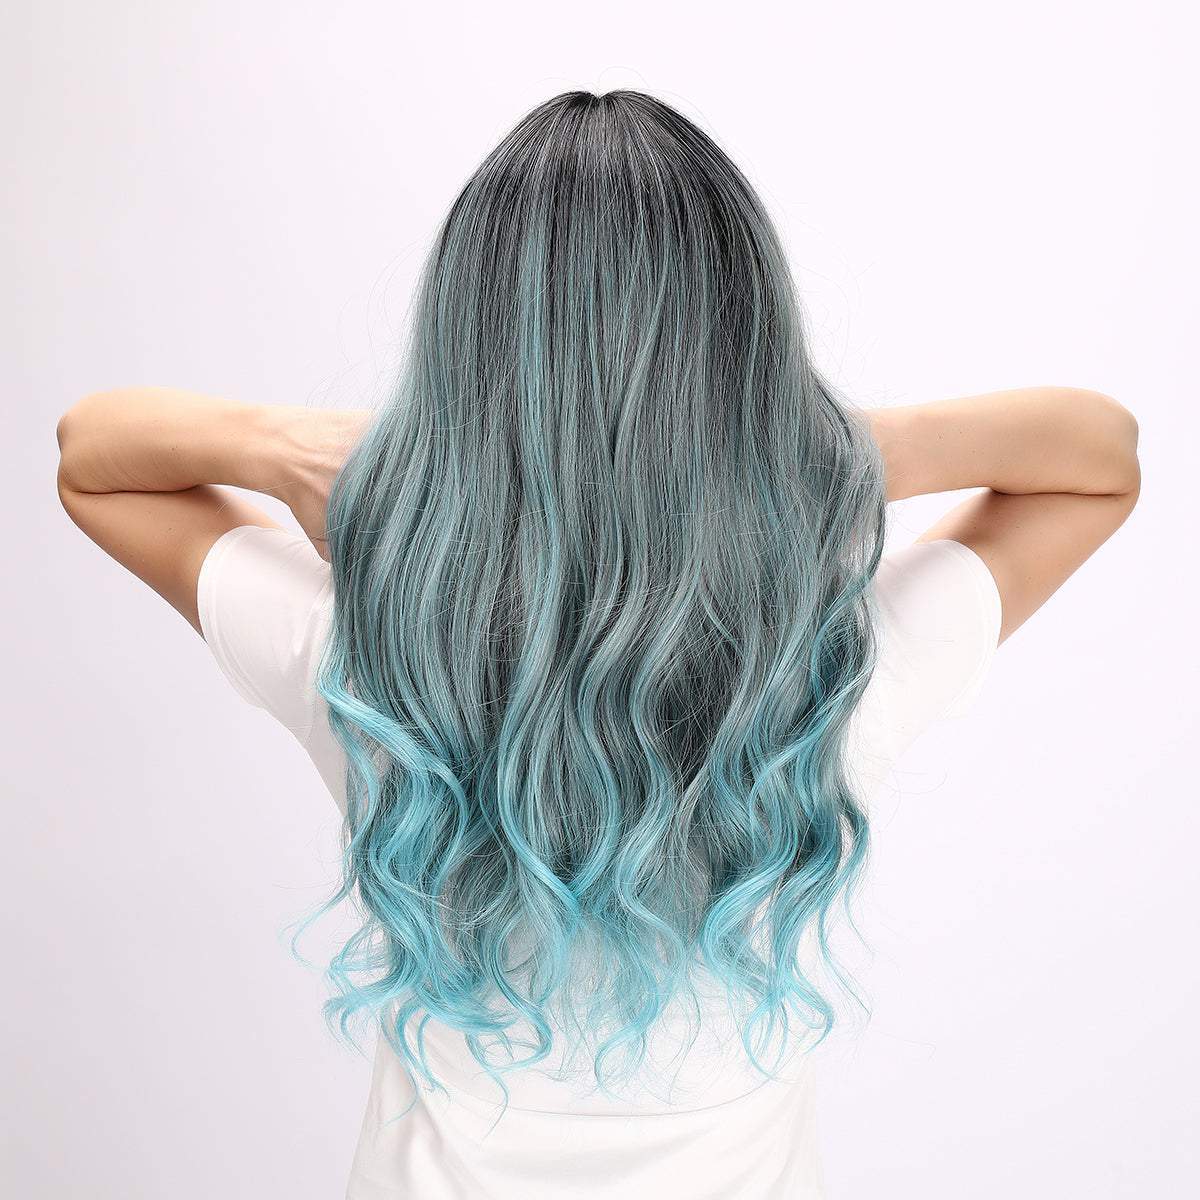 28-inch | Blue-gray gradient Loose Wave with Hair Bangs | SM6162 - TapLike